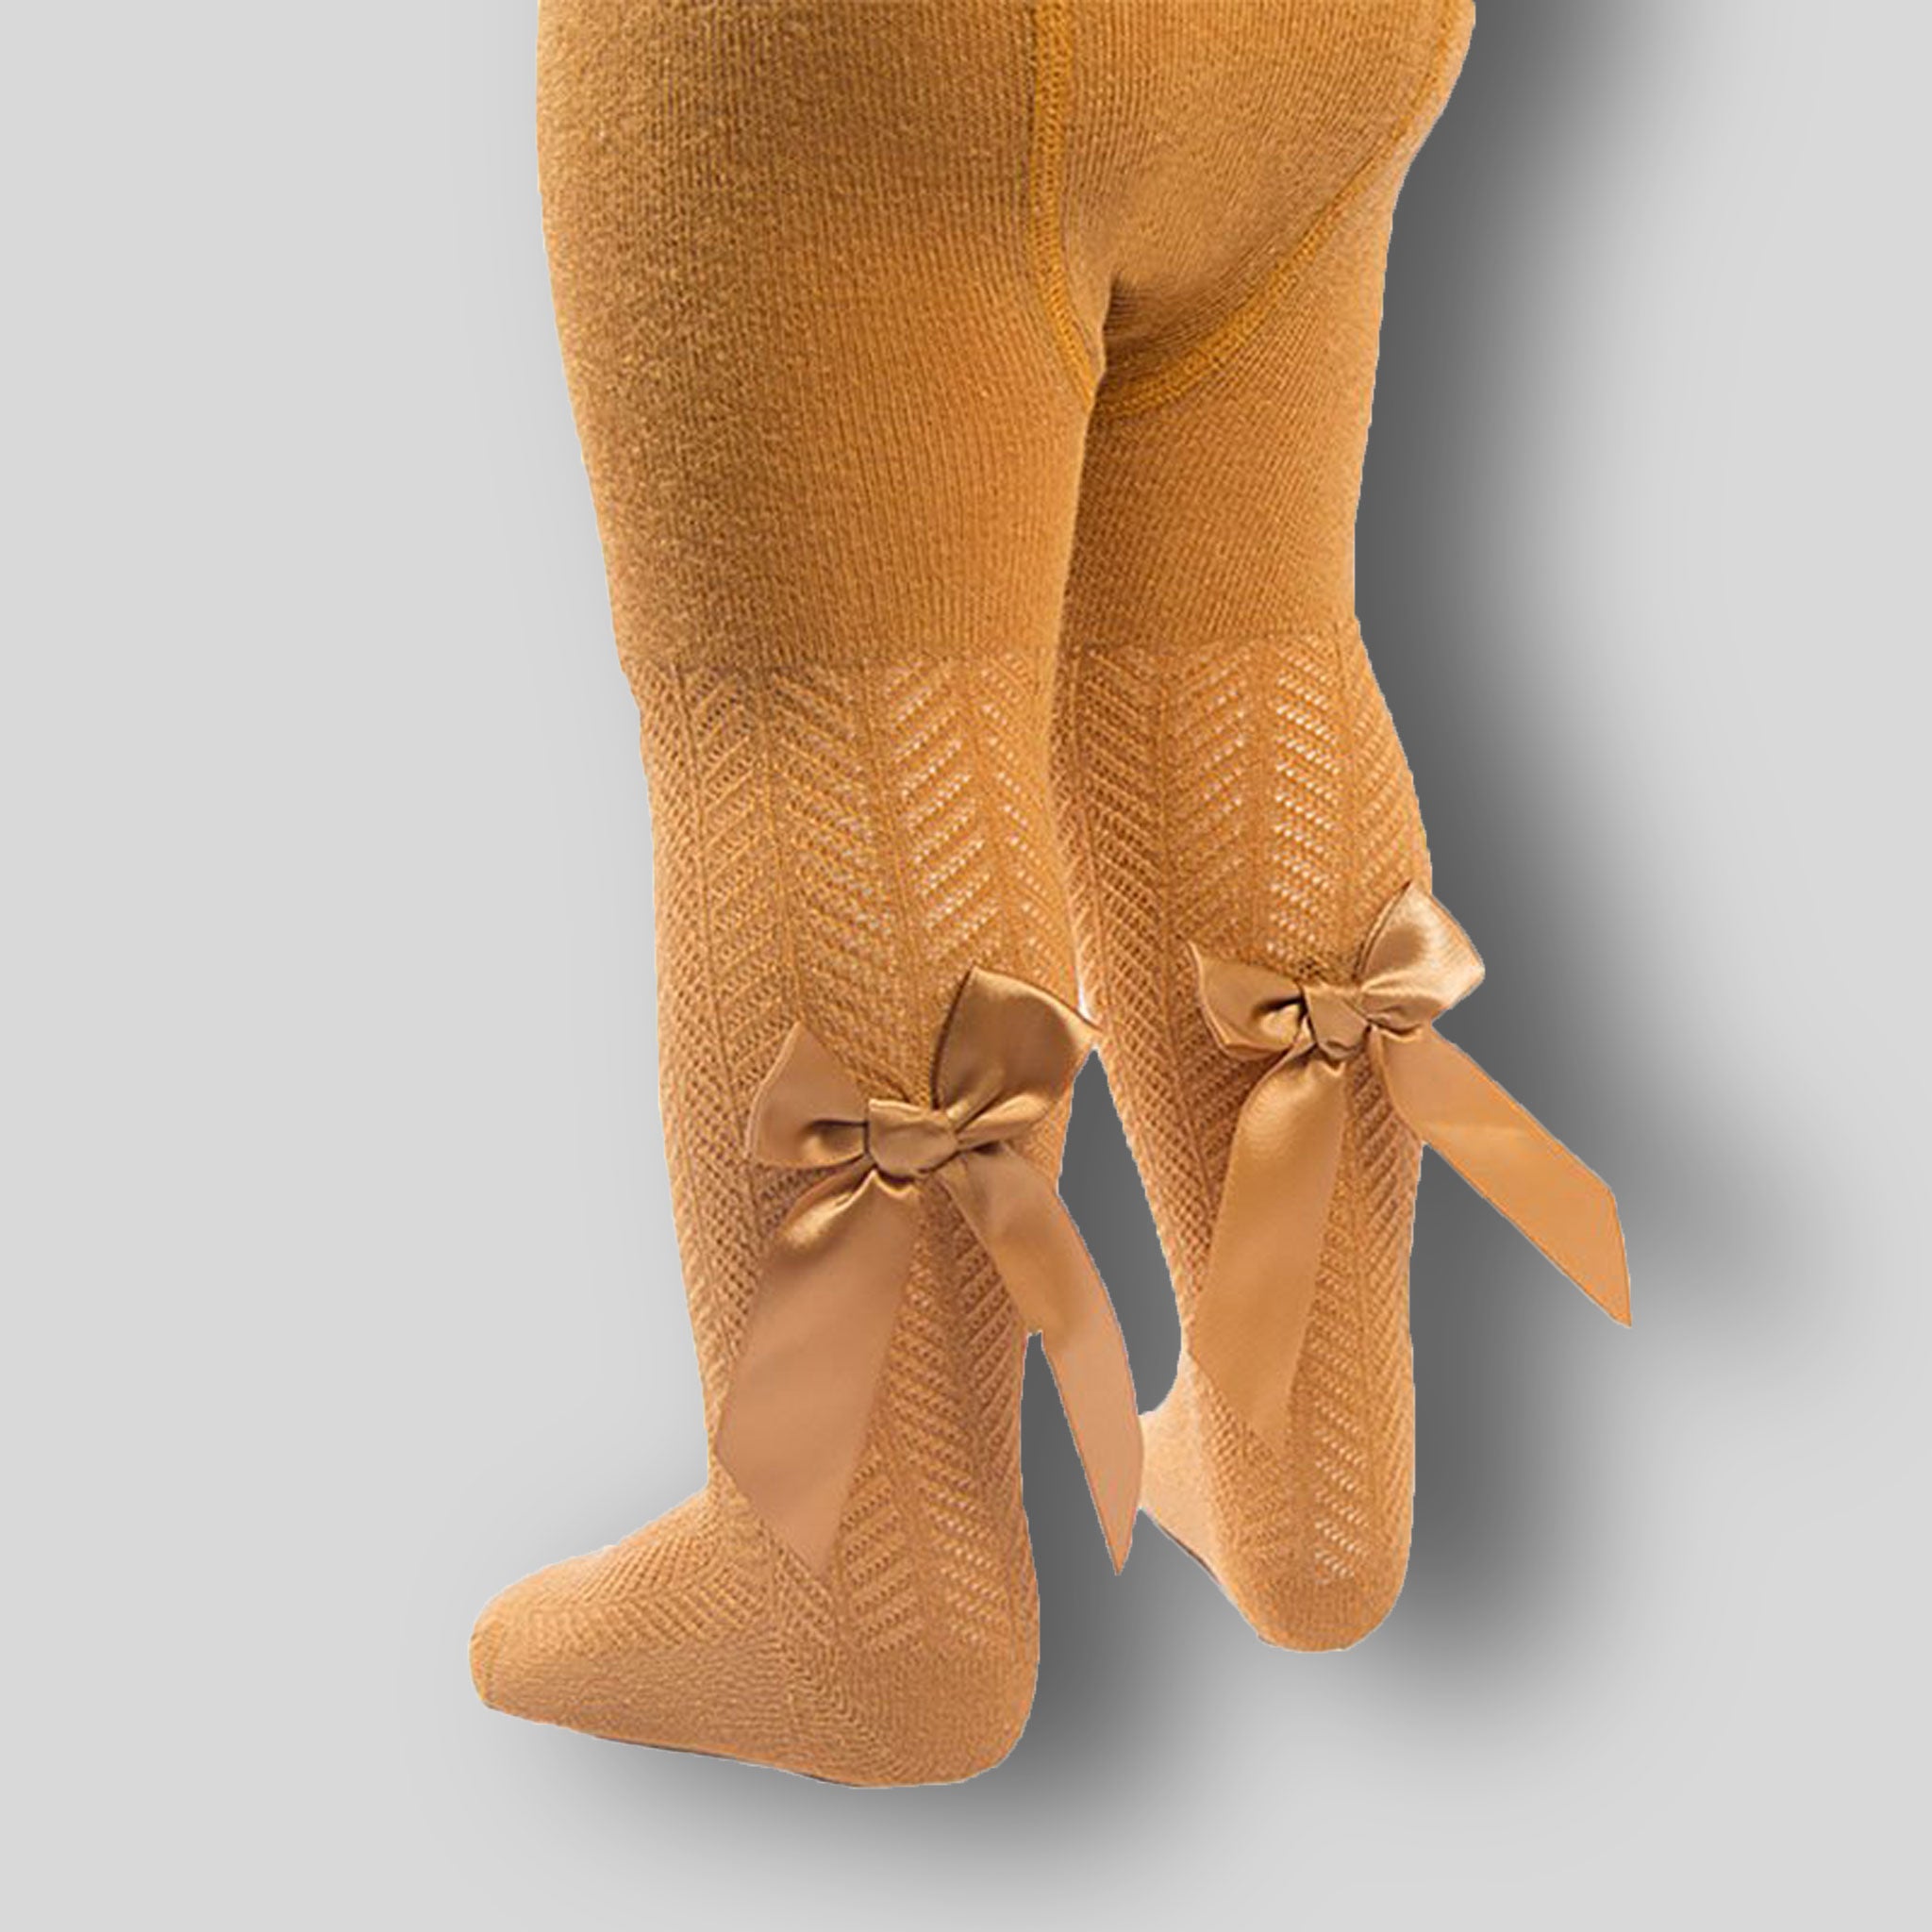 Baby Girls Mustard Tights with Satin Bow